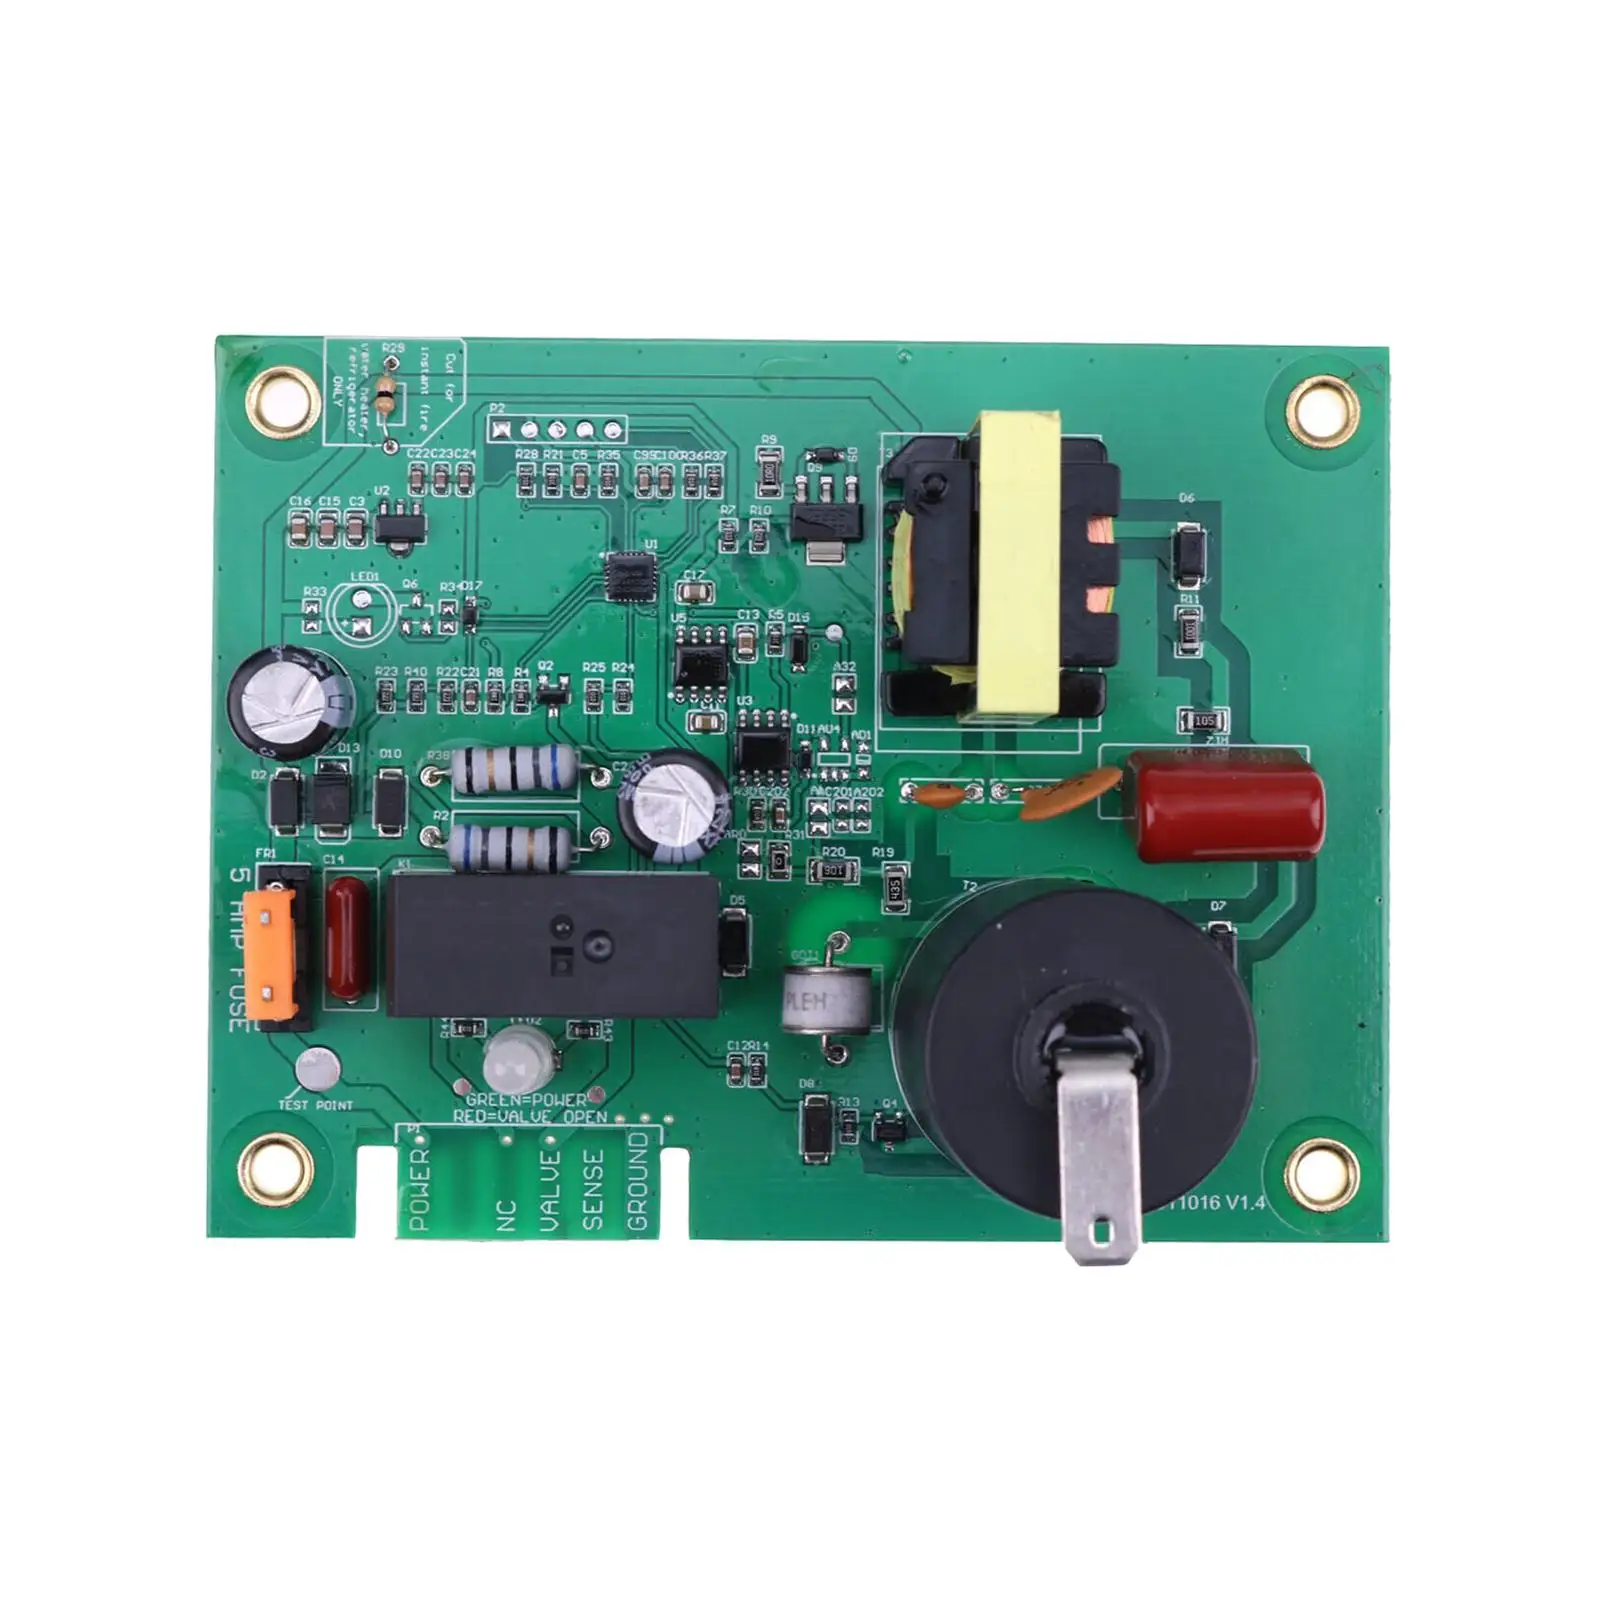 Ignition Board Uib S DC 12V Dual Sense Replacement Easy Installation Durable